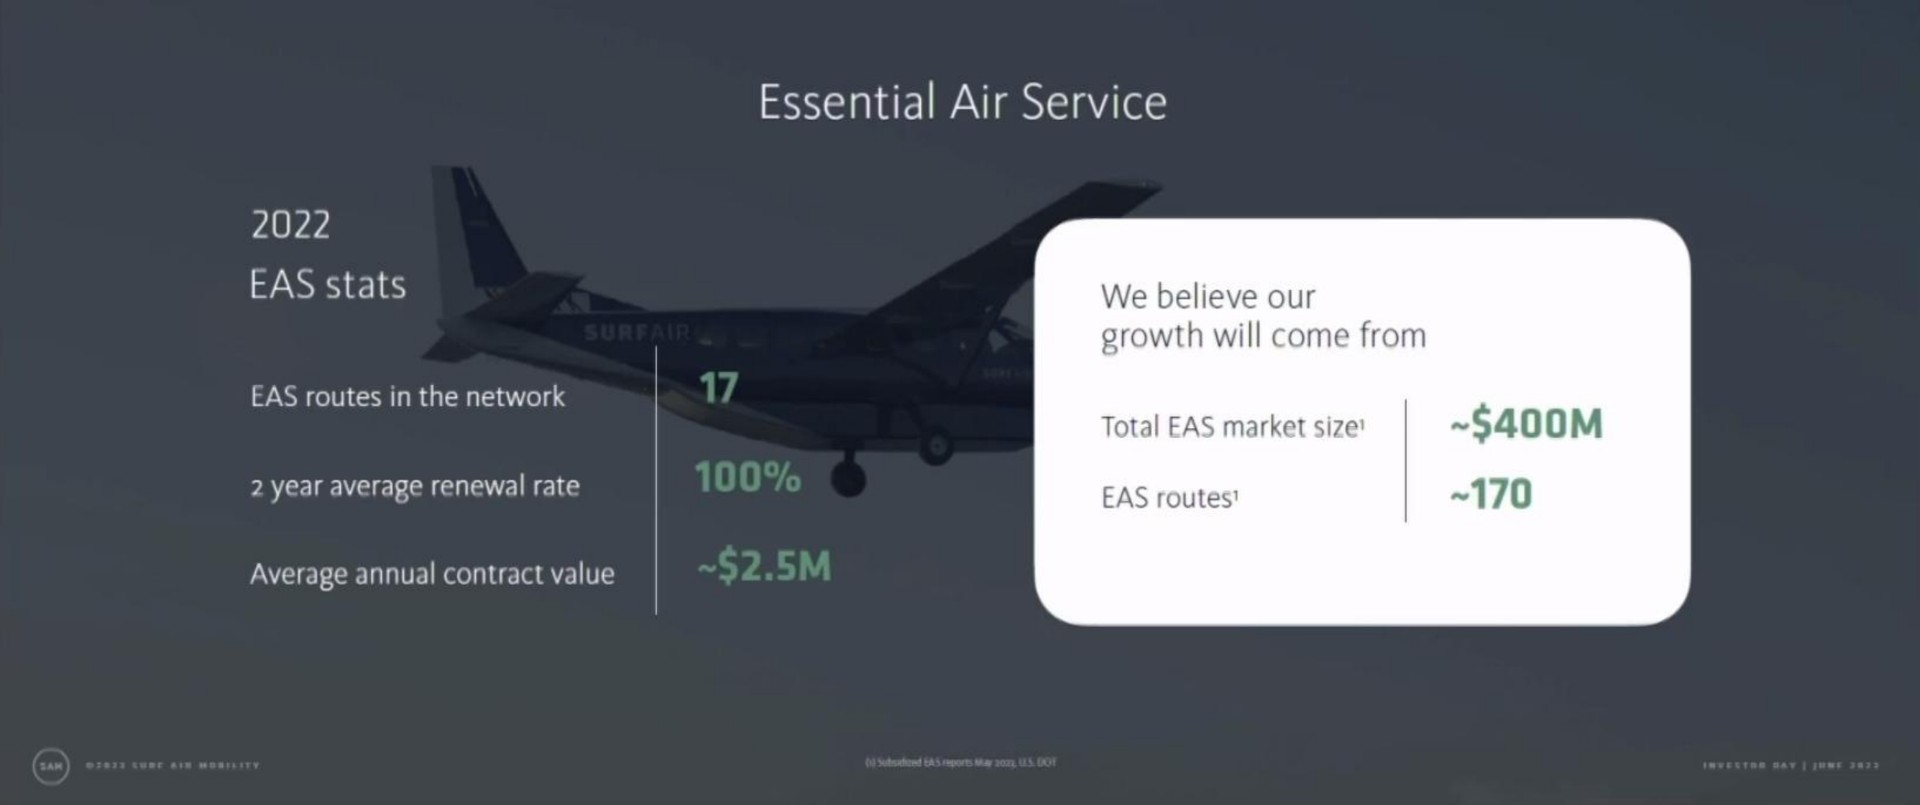 essential air service we believe our growth will come from total eas market size eas routes am an year average renewal rate average annual contract value | Surf Air